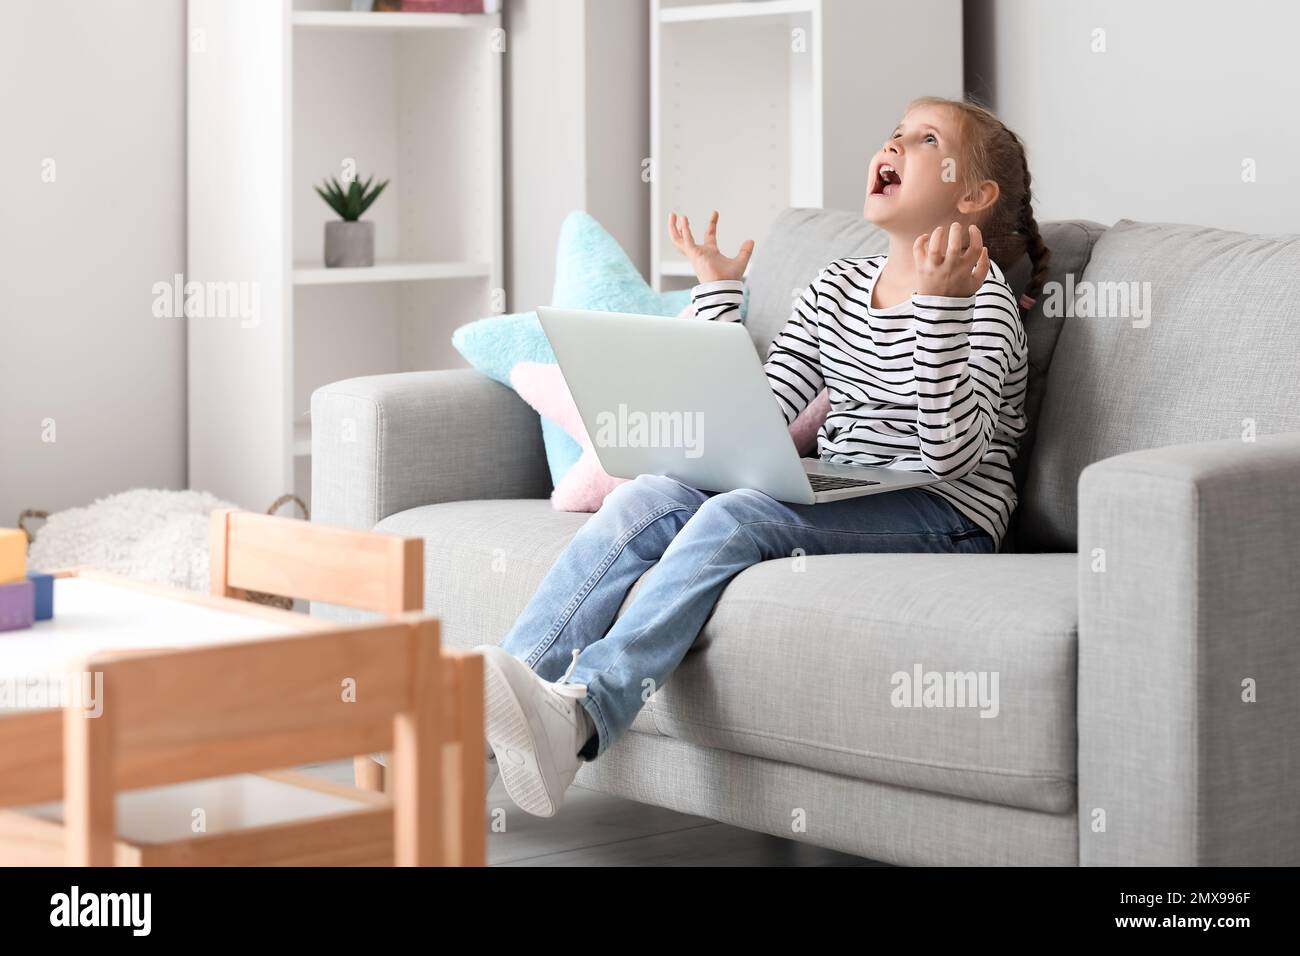 Angry little girl video chatting with psychologist on laptop at home Stock Photo